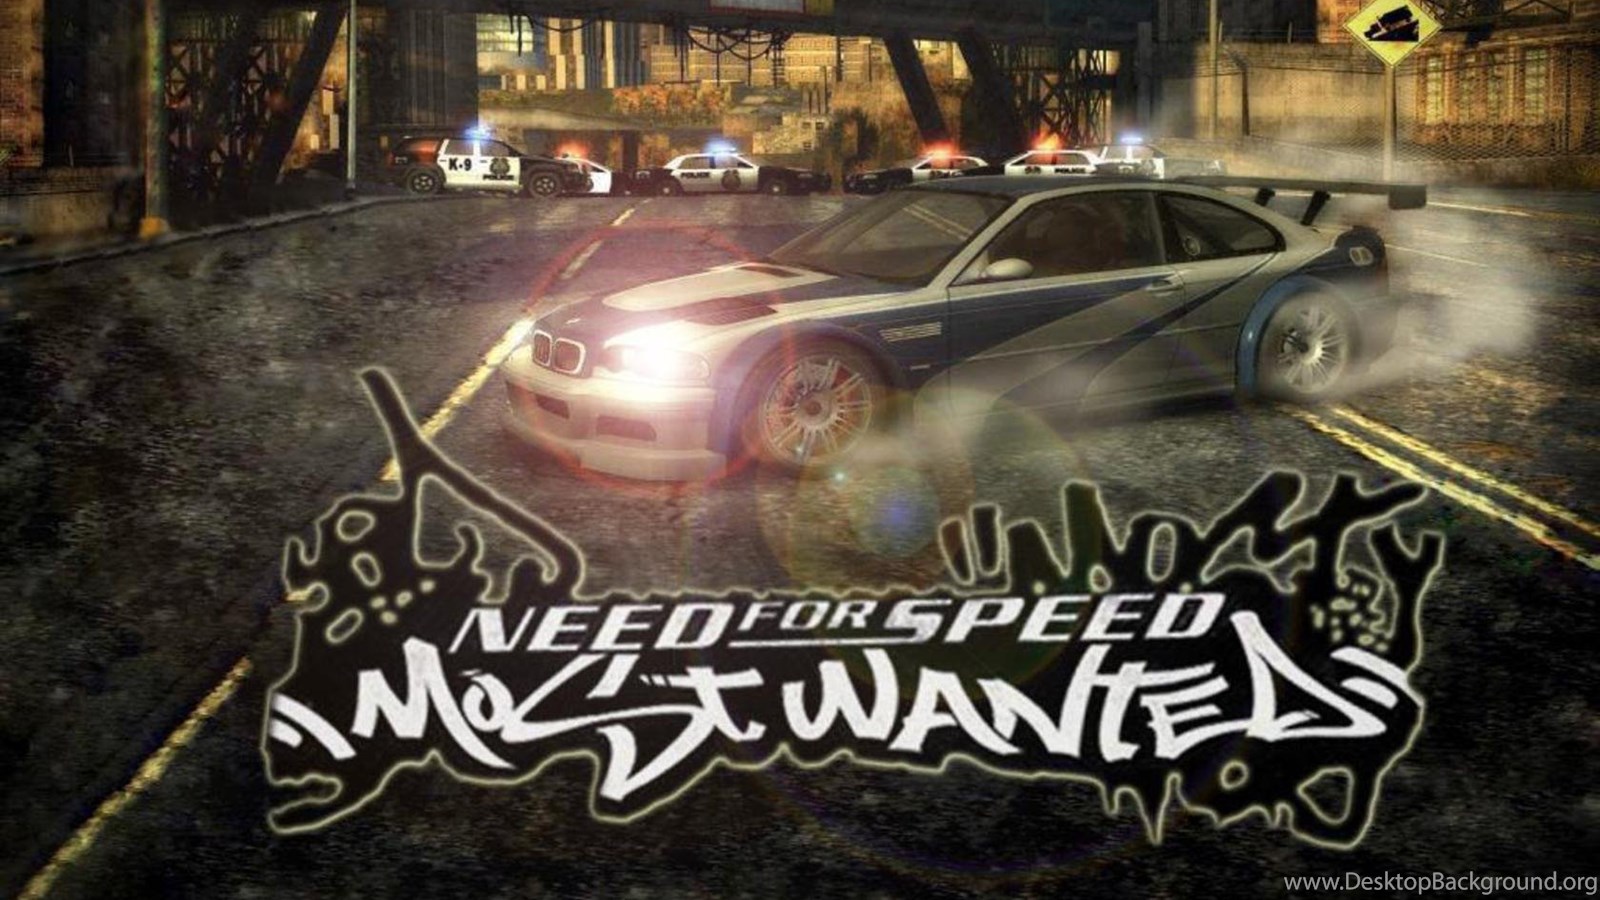 Саундтреки нфс мост вантед. Новый NFS most wanted 2005. Most wanted 2005 геймплей. Need for Speed most wanted стрим. NFS MW 2005 Remake.